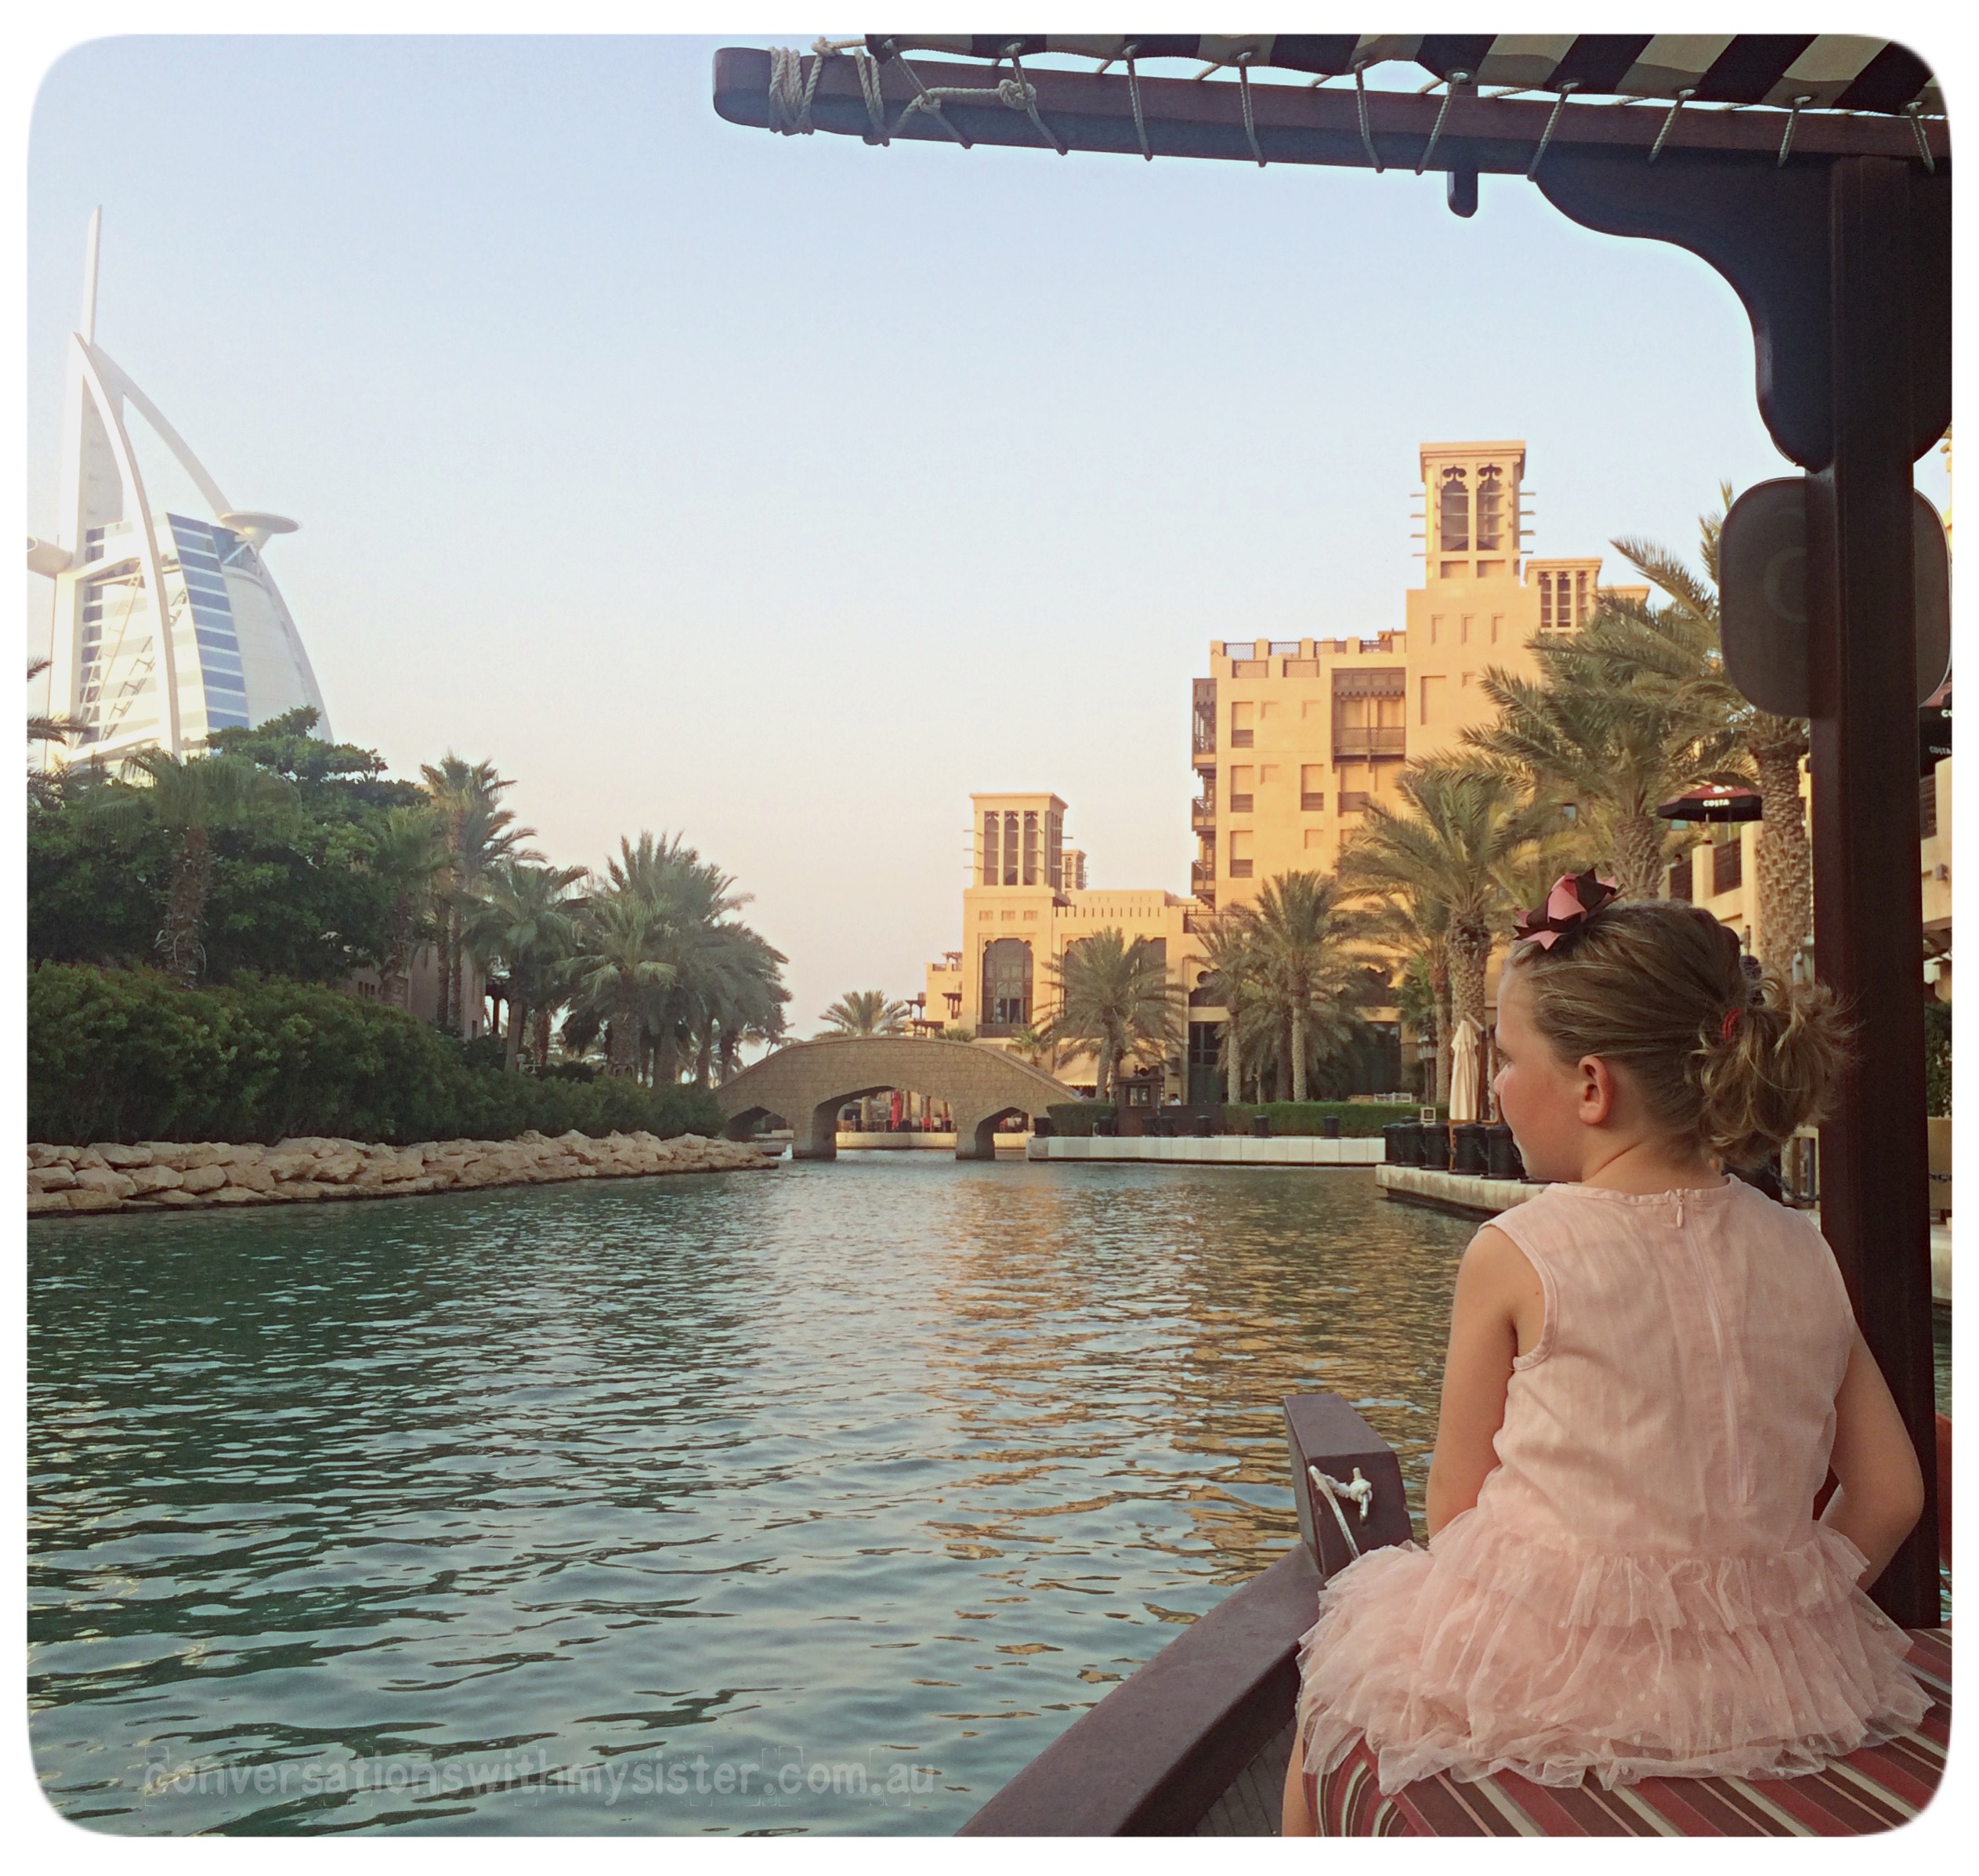 The extravagance, elegance and luxury that is Madinat Jumeirah in Dubai hits you the second you enter the long imposing driveway. This is UAE luxury at its best, where Abras transfer you between relaxing poolside activities to lavish dining experiences. And take the kids - they will love the onsite turtle rehabilitation centre and the thrill of the Wild Wadi Waterpark. 